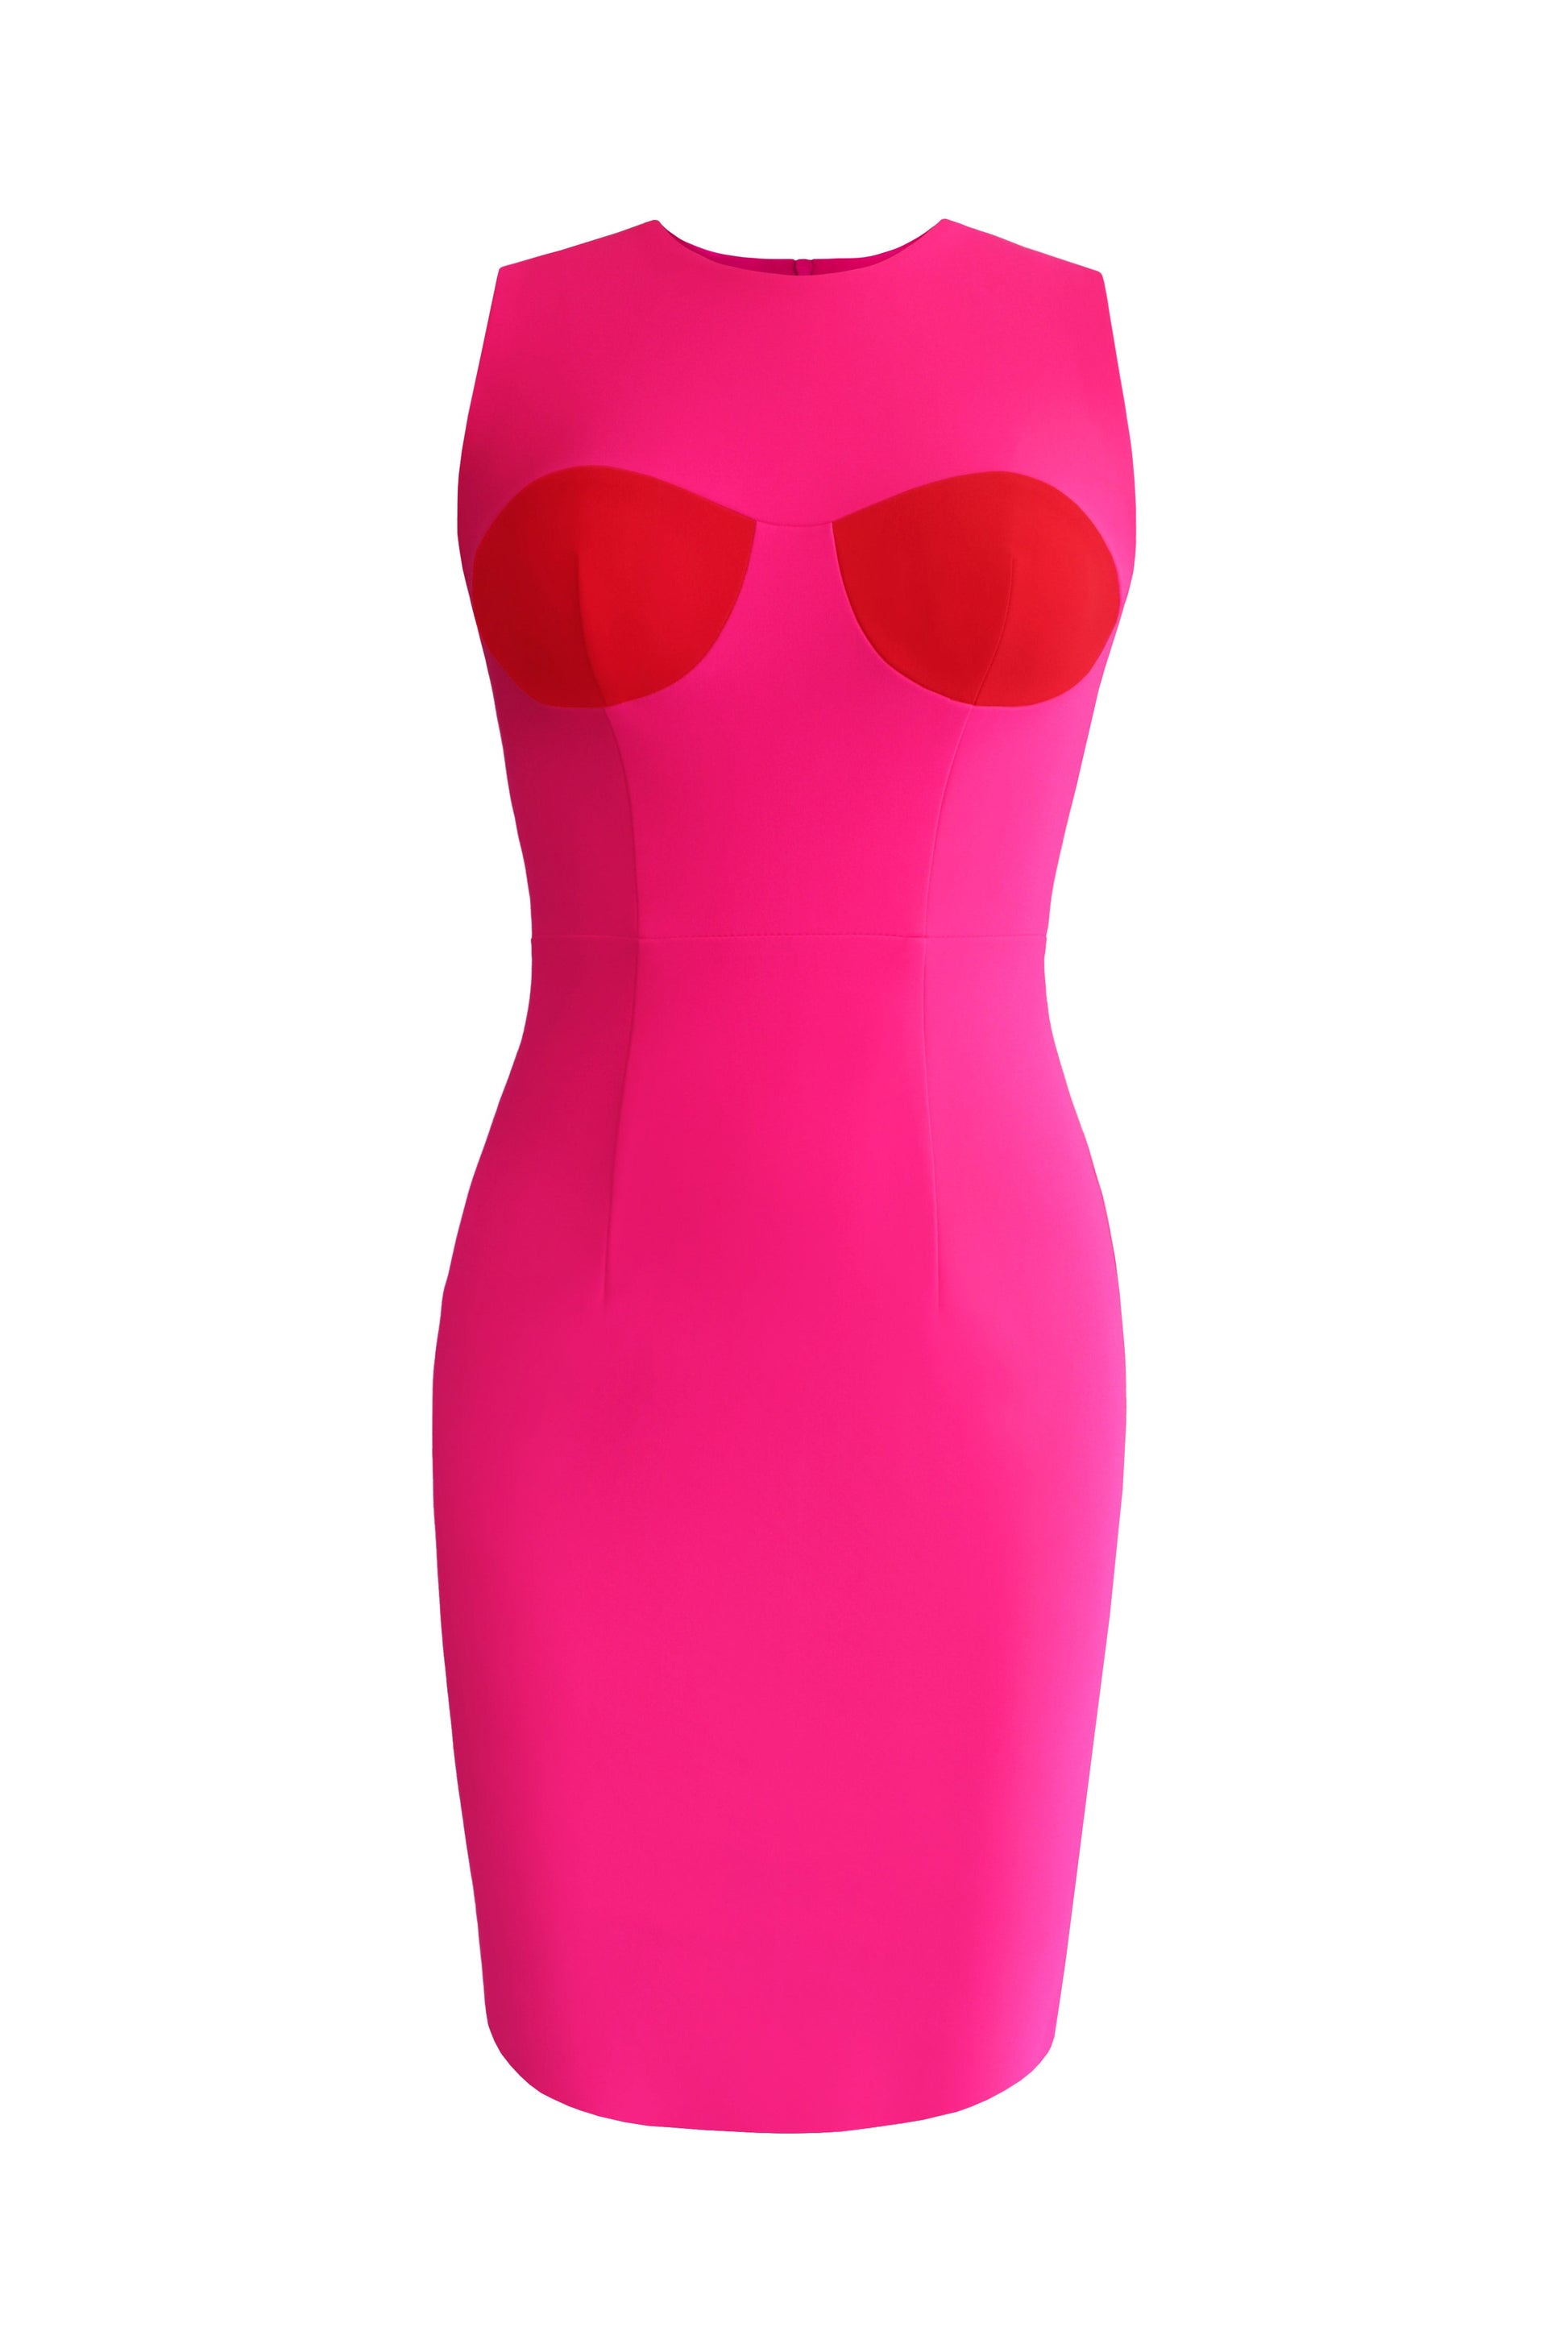 Pink and red sleeveless bodycon midi dress for women